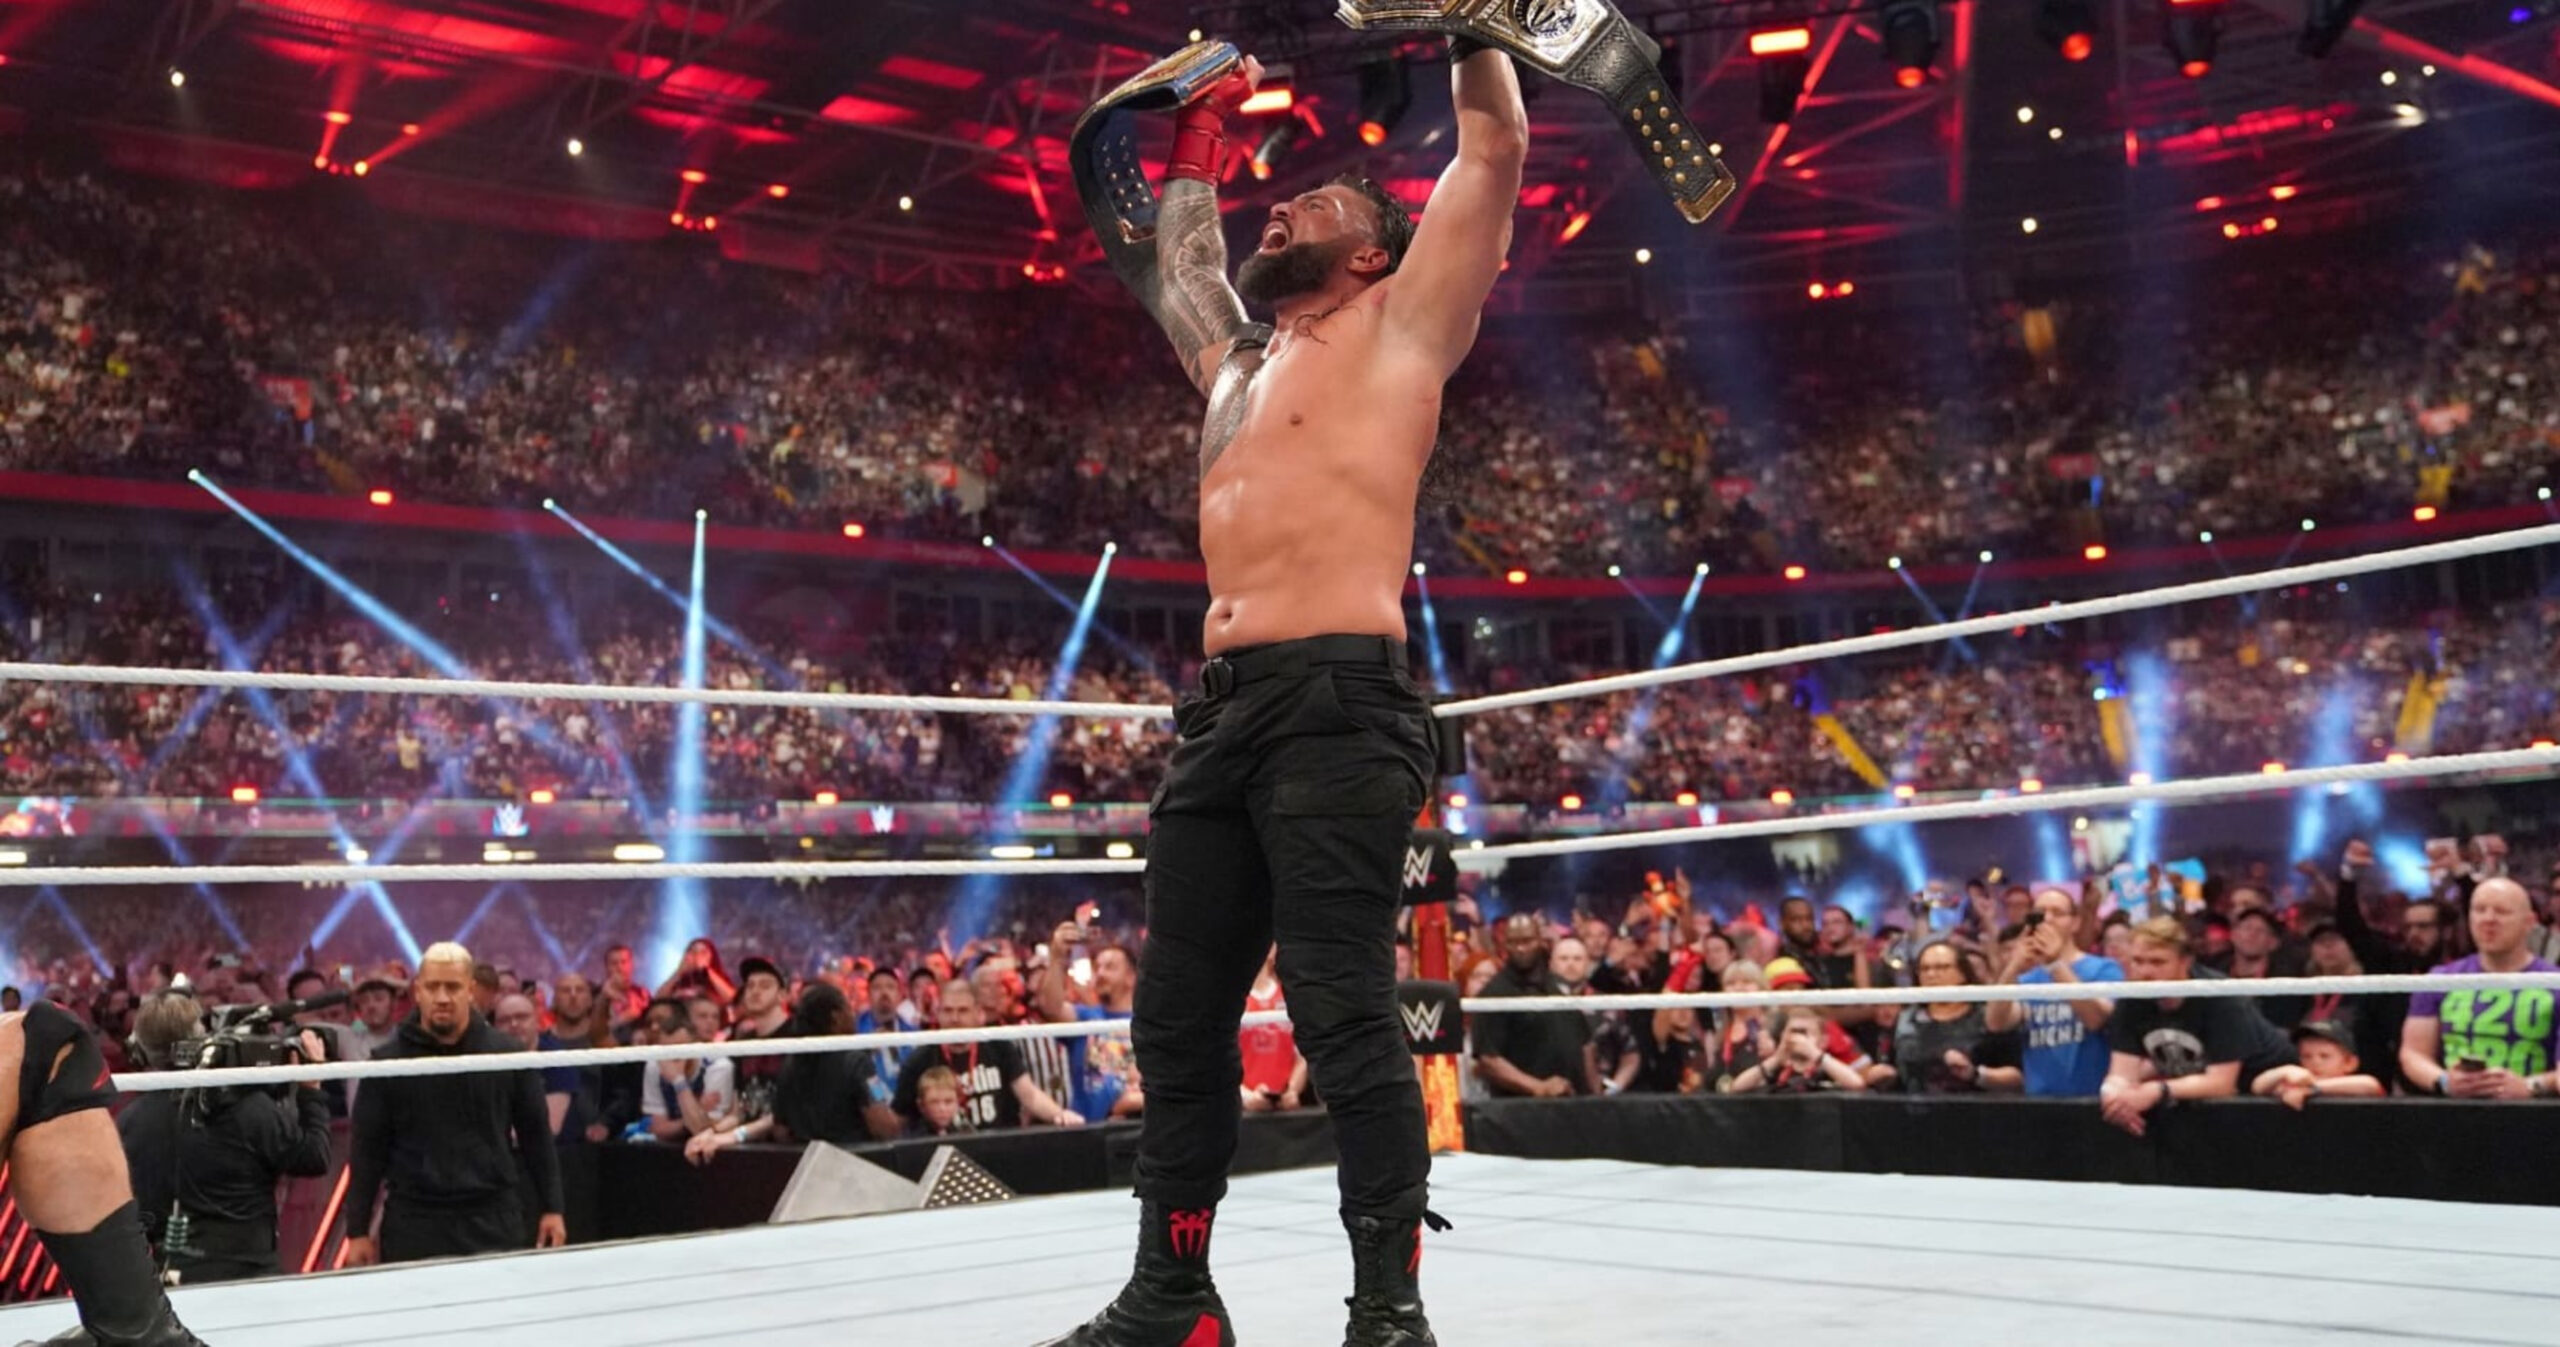 What’s Next for Roman Reigns After Beating Drew McIntyre at WWE Clash at the Castle?